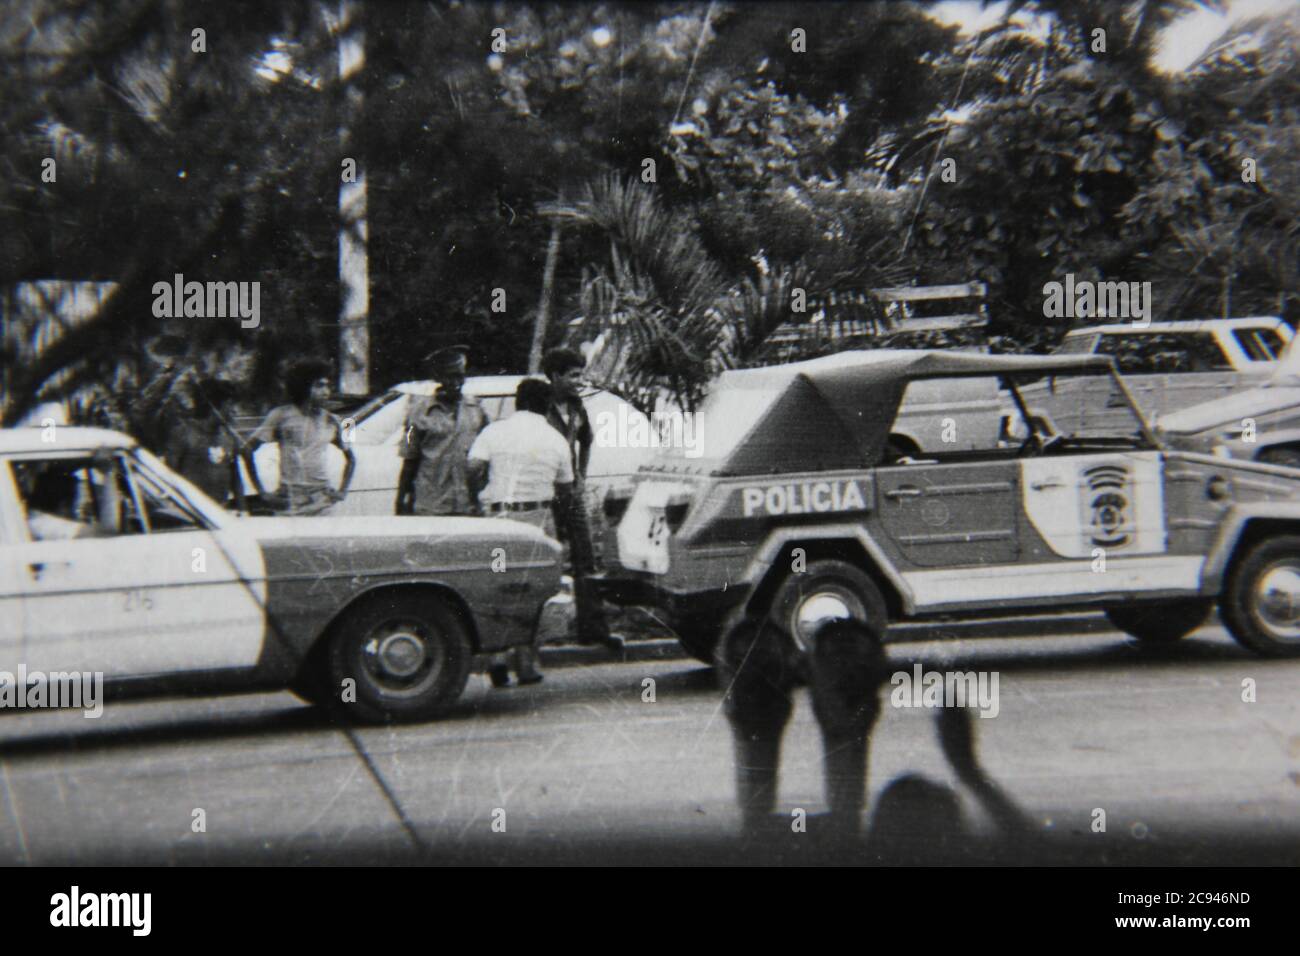 Fine 70s vintage black and white street photography of a policia car and people watching an incident in Mexico. Stock Photo